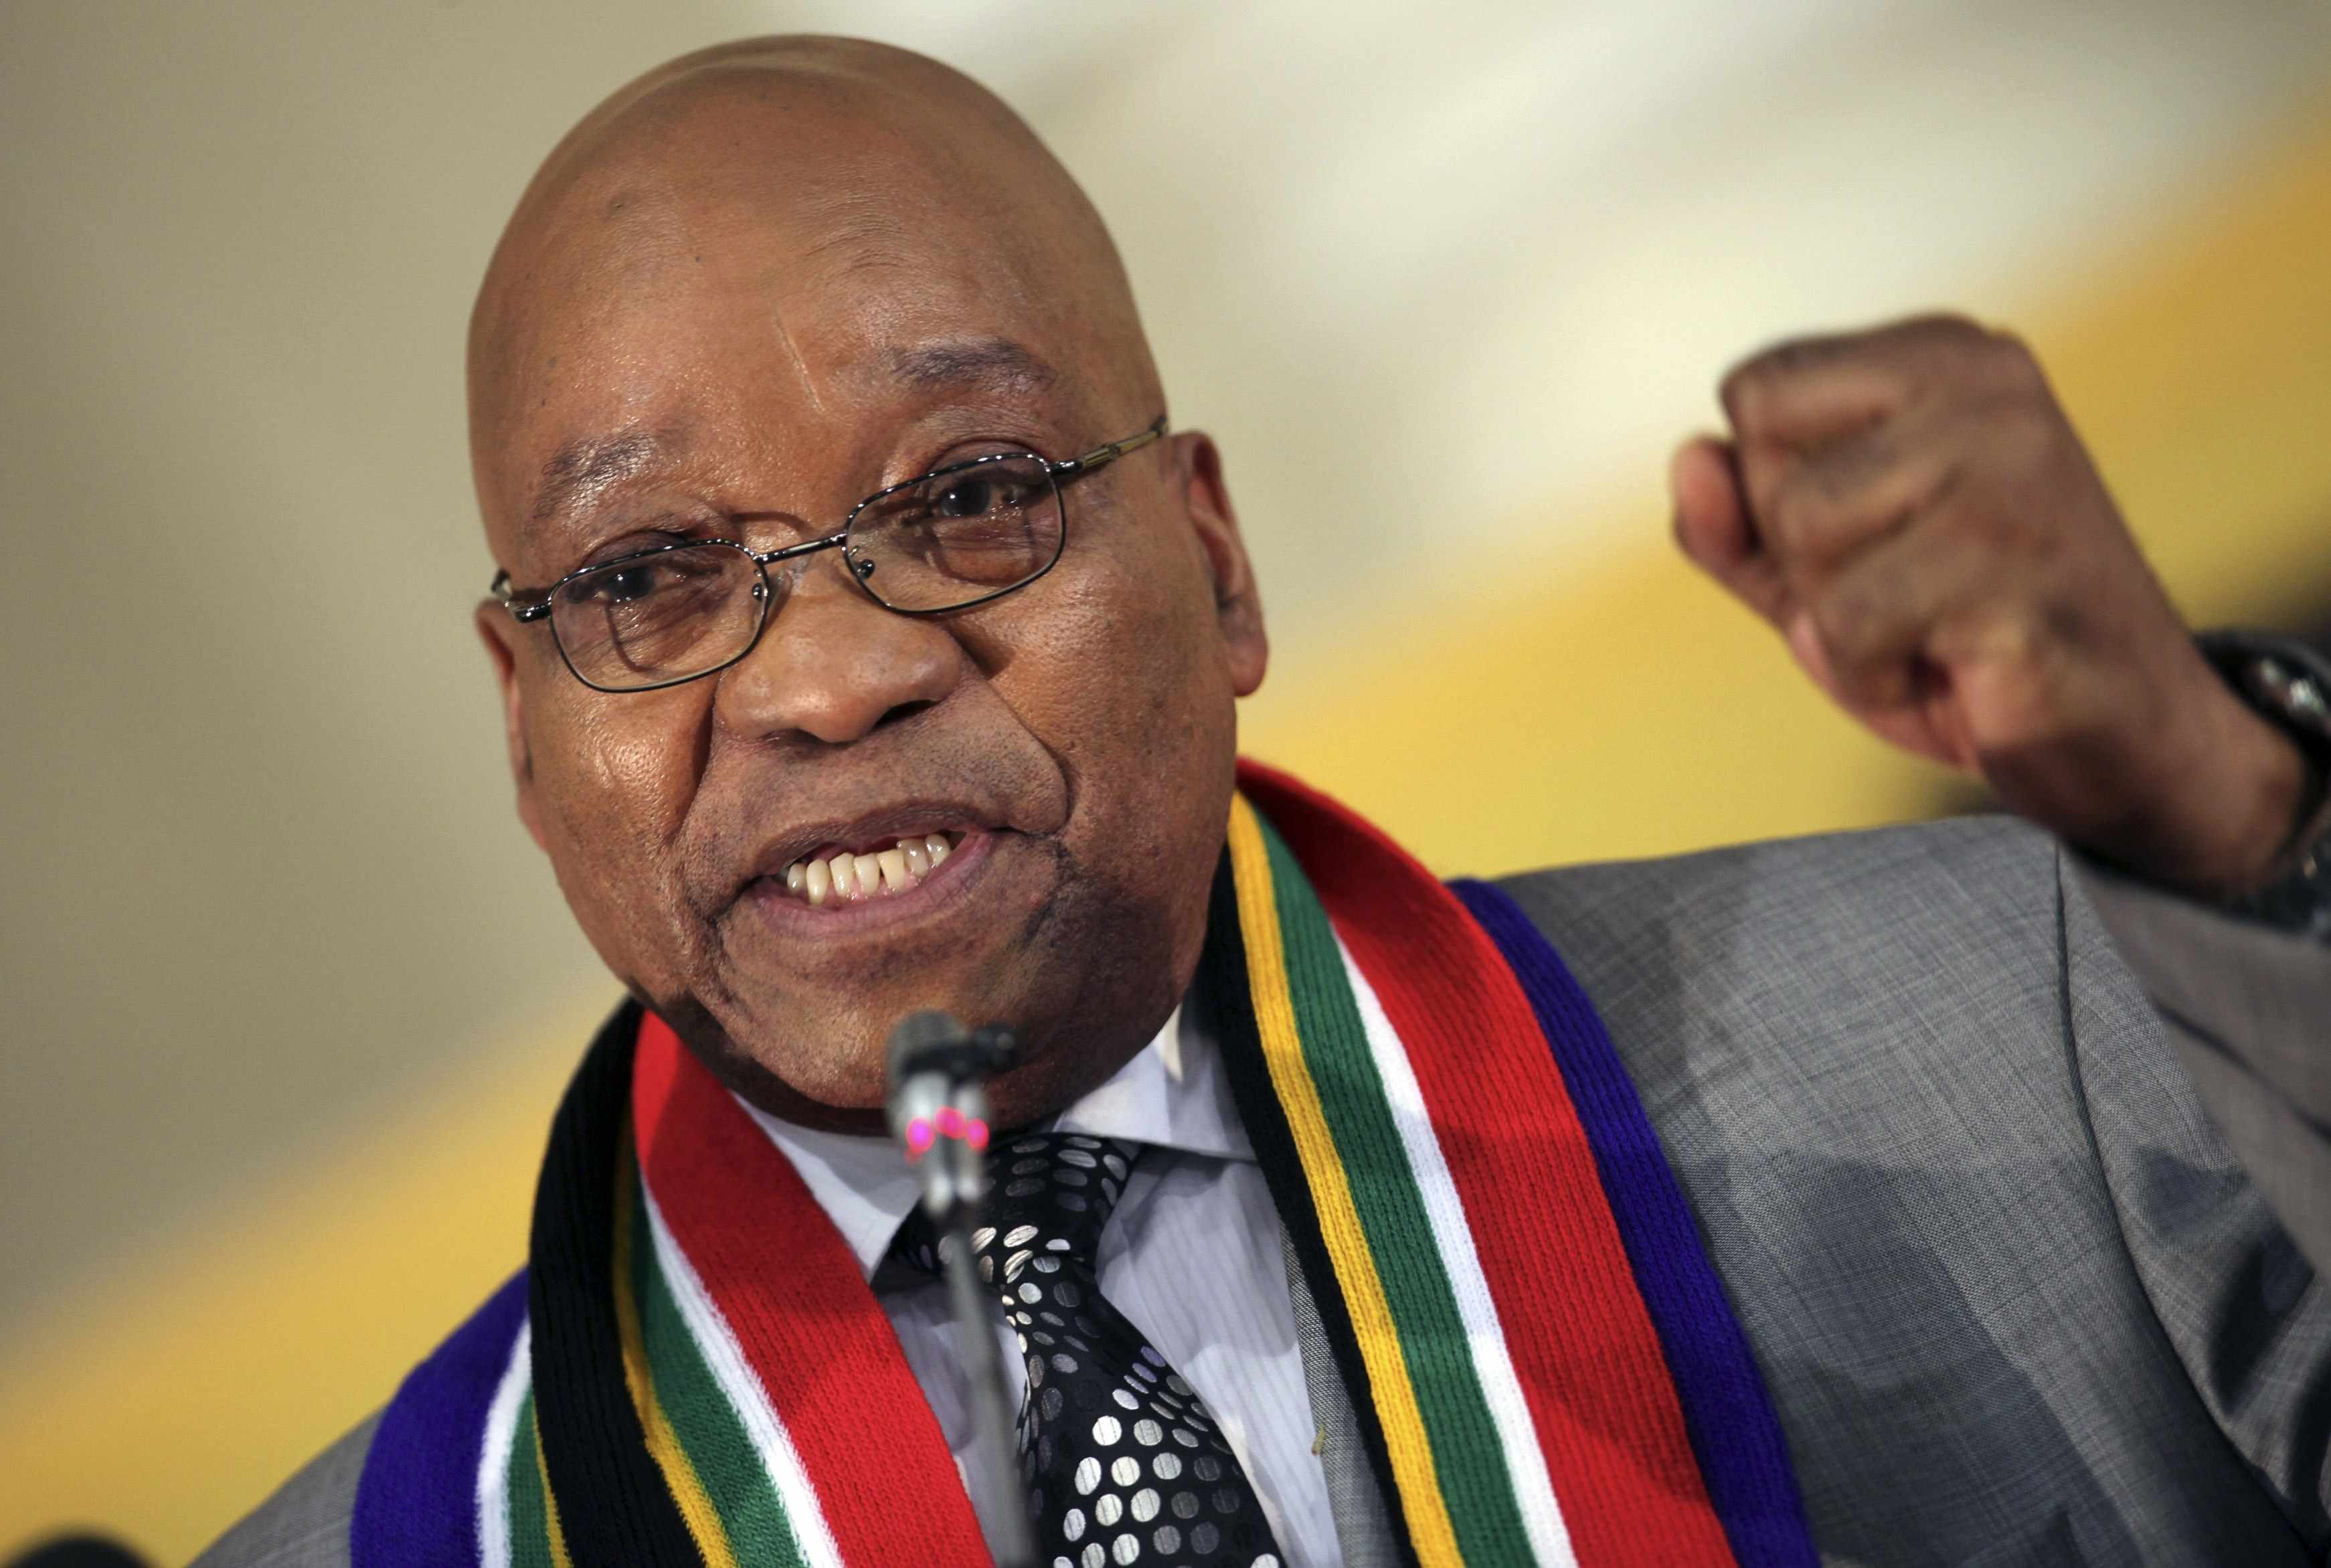 Latest Salaries Of Top South African Politicians Revealed